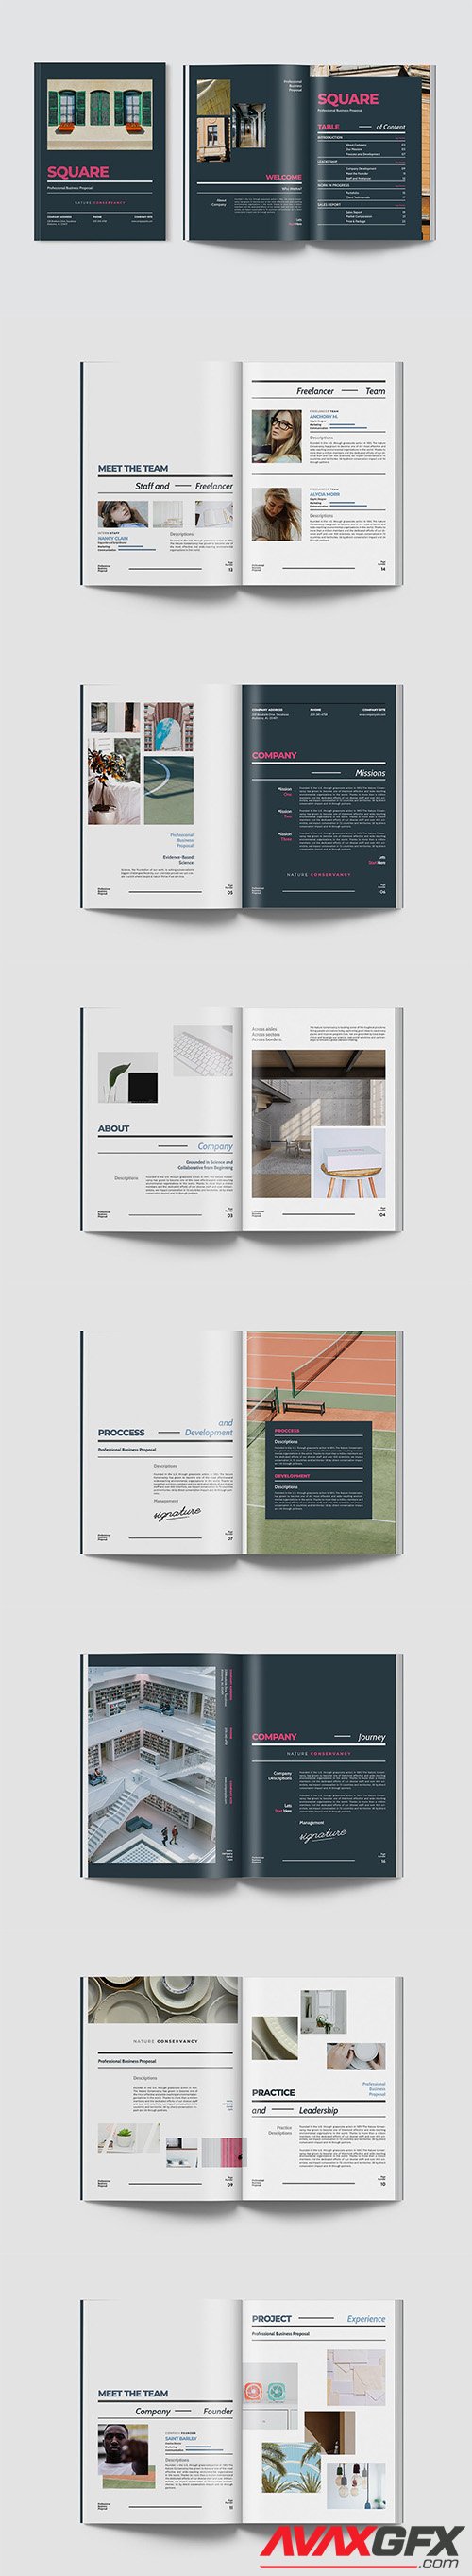 Square - Professional Business Proposal Indesign 2DF4BET